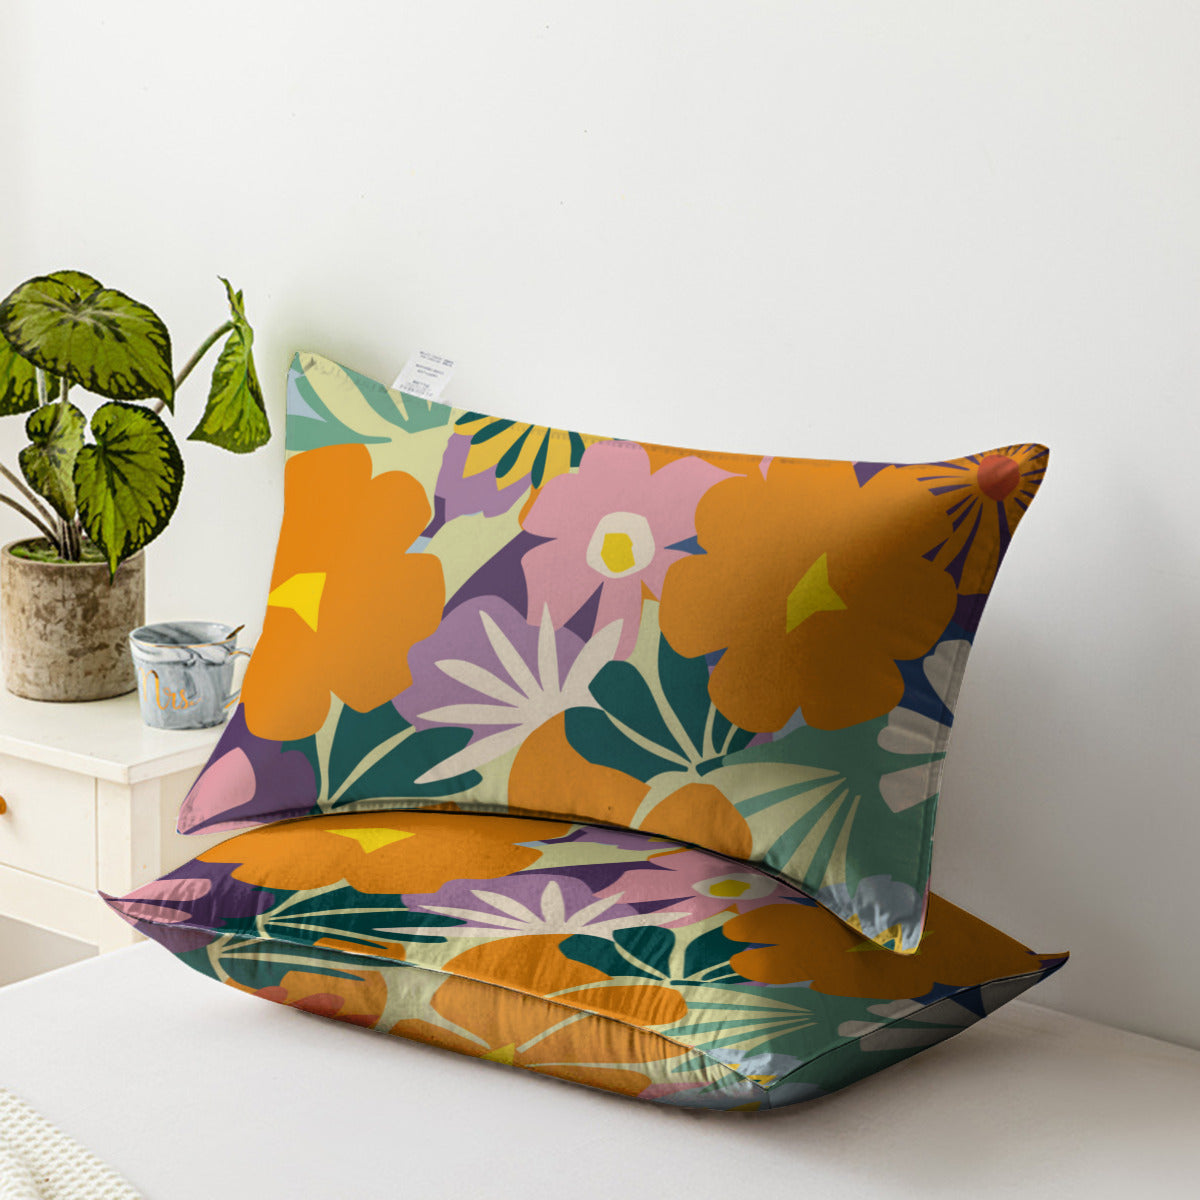 Vampire Art Cotton Cushion Cover Pillowcase 16 x 24in (40 x 60cm) - Bold Sixties Florals in Orange